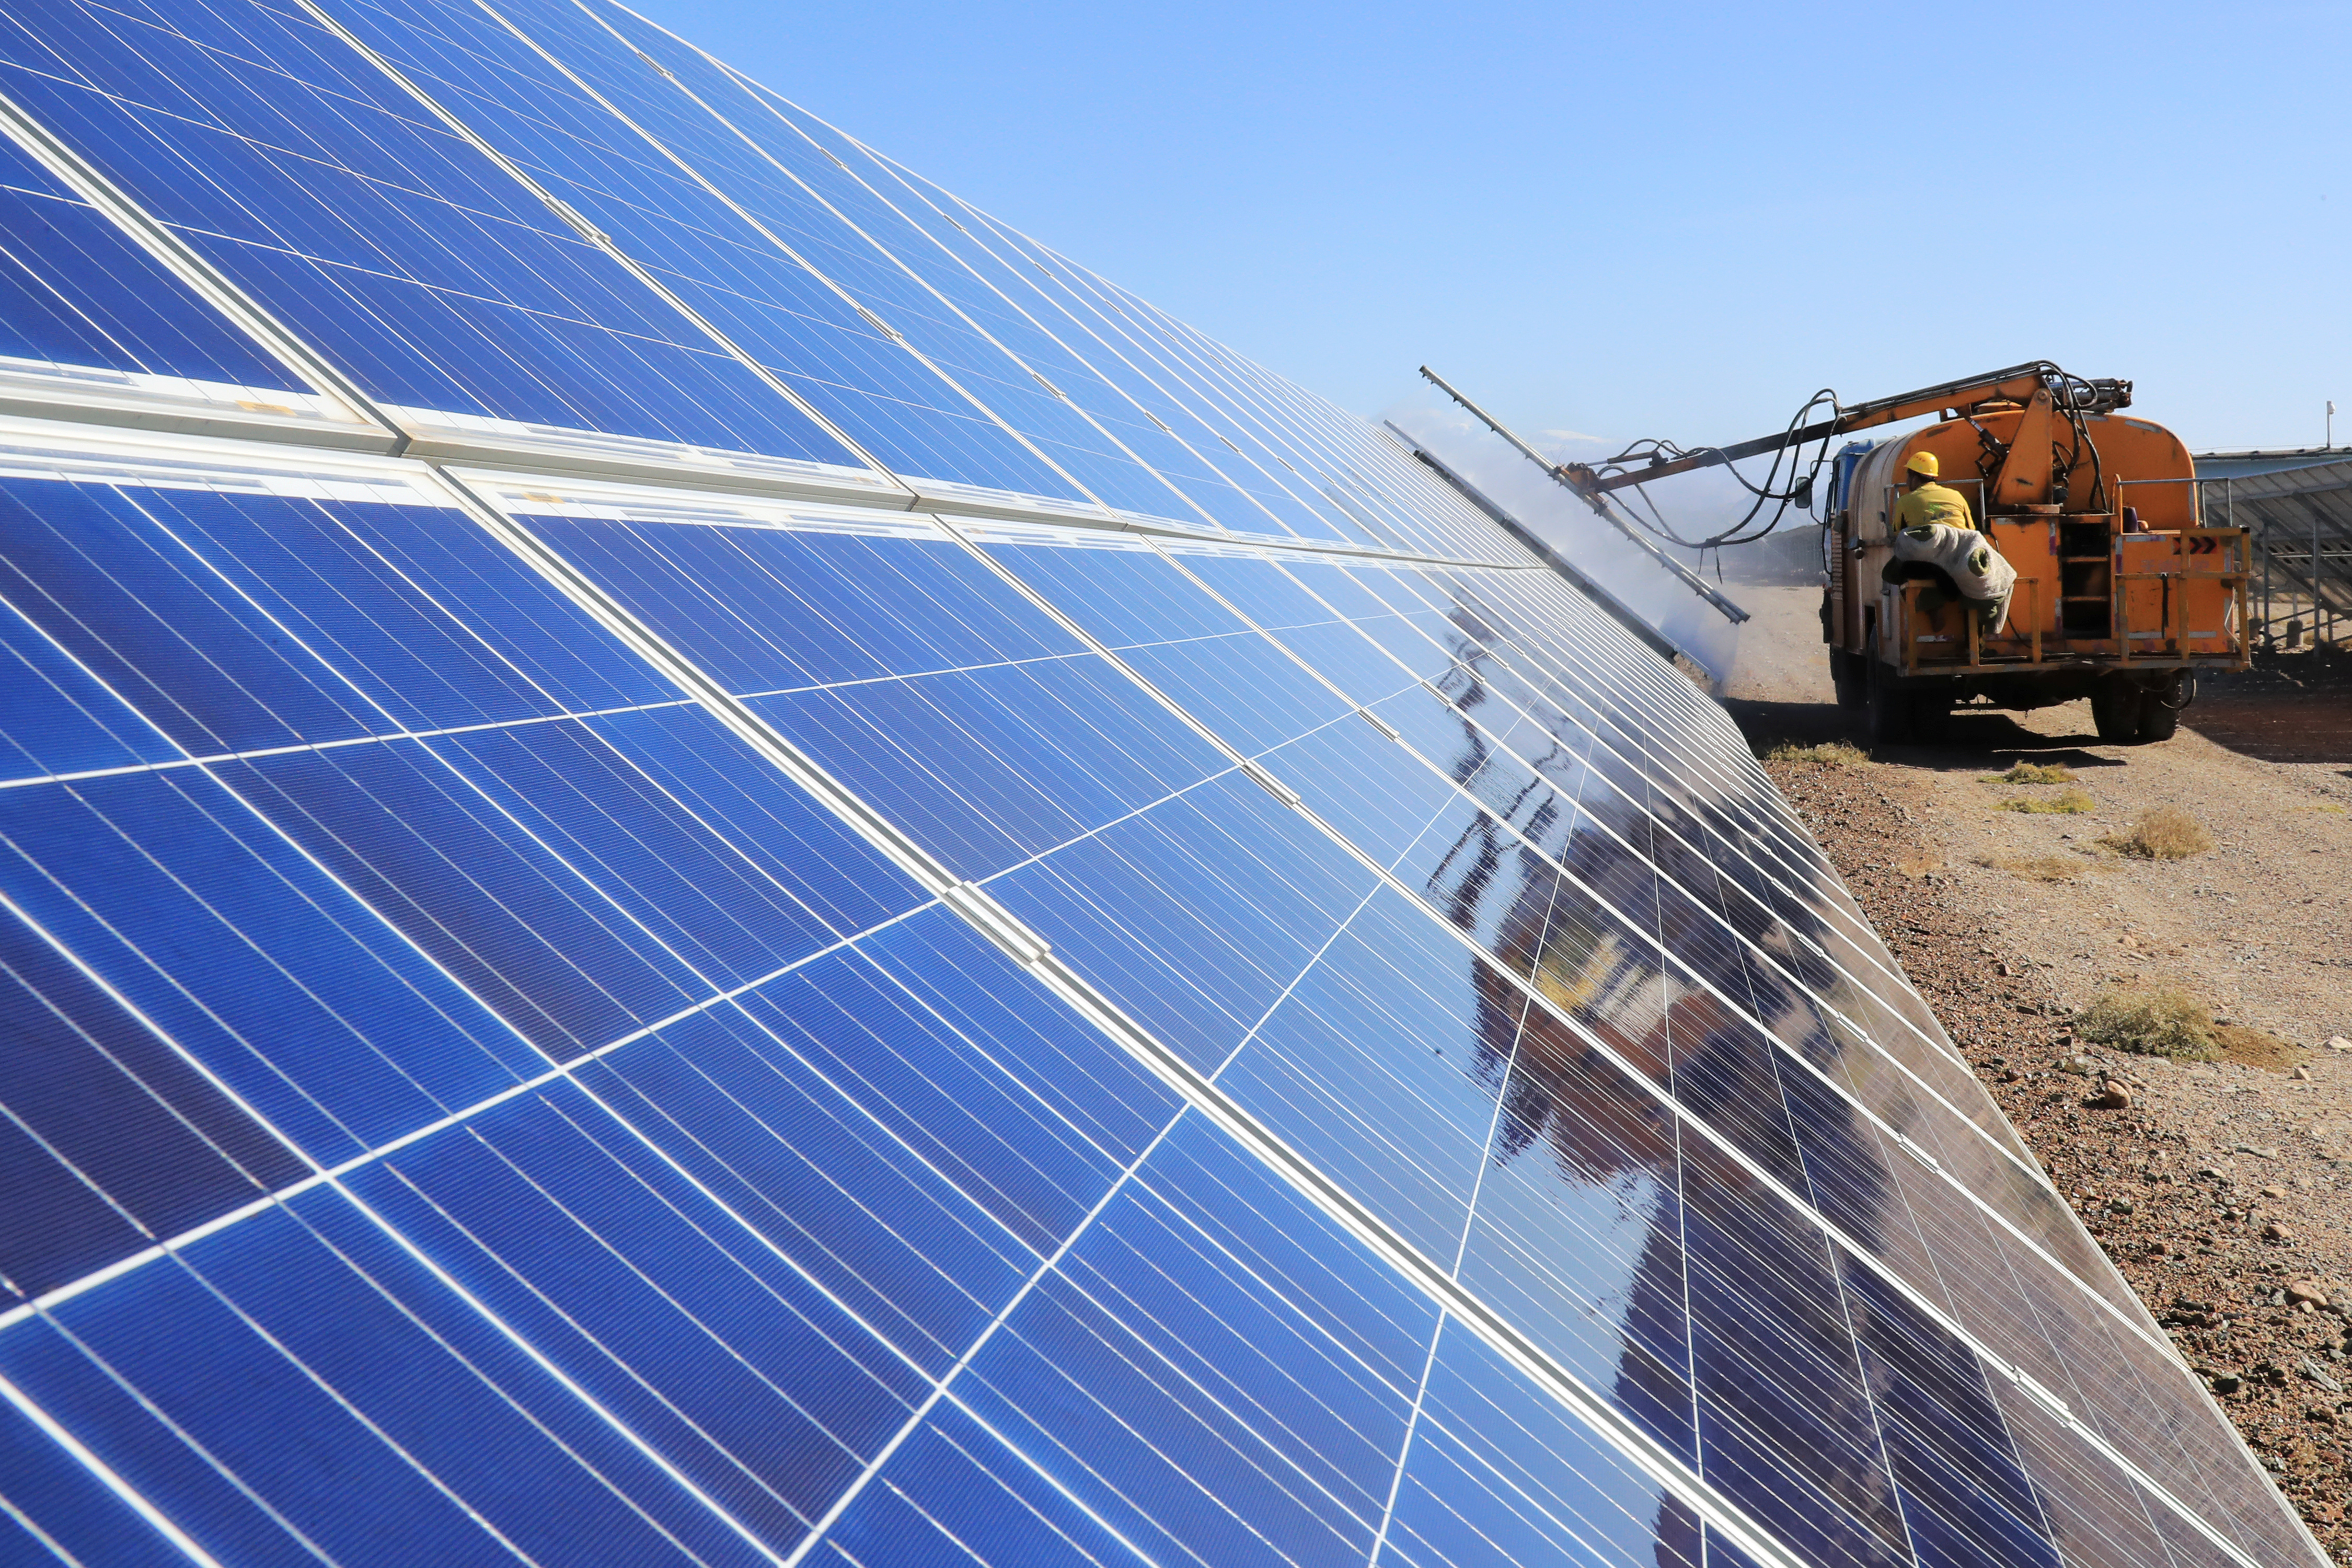 Worker operates a machinery to clean solar panels at a photovoltaic industrial park in Hami